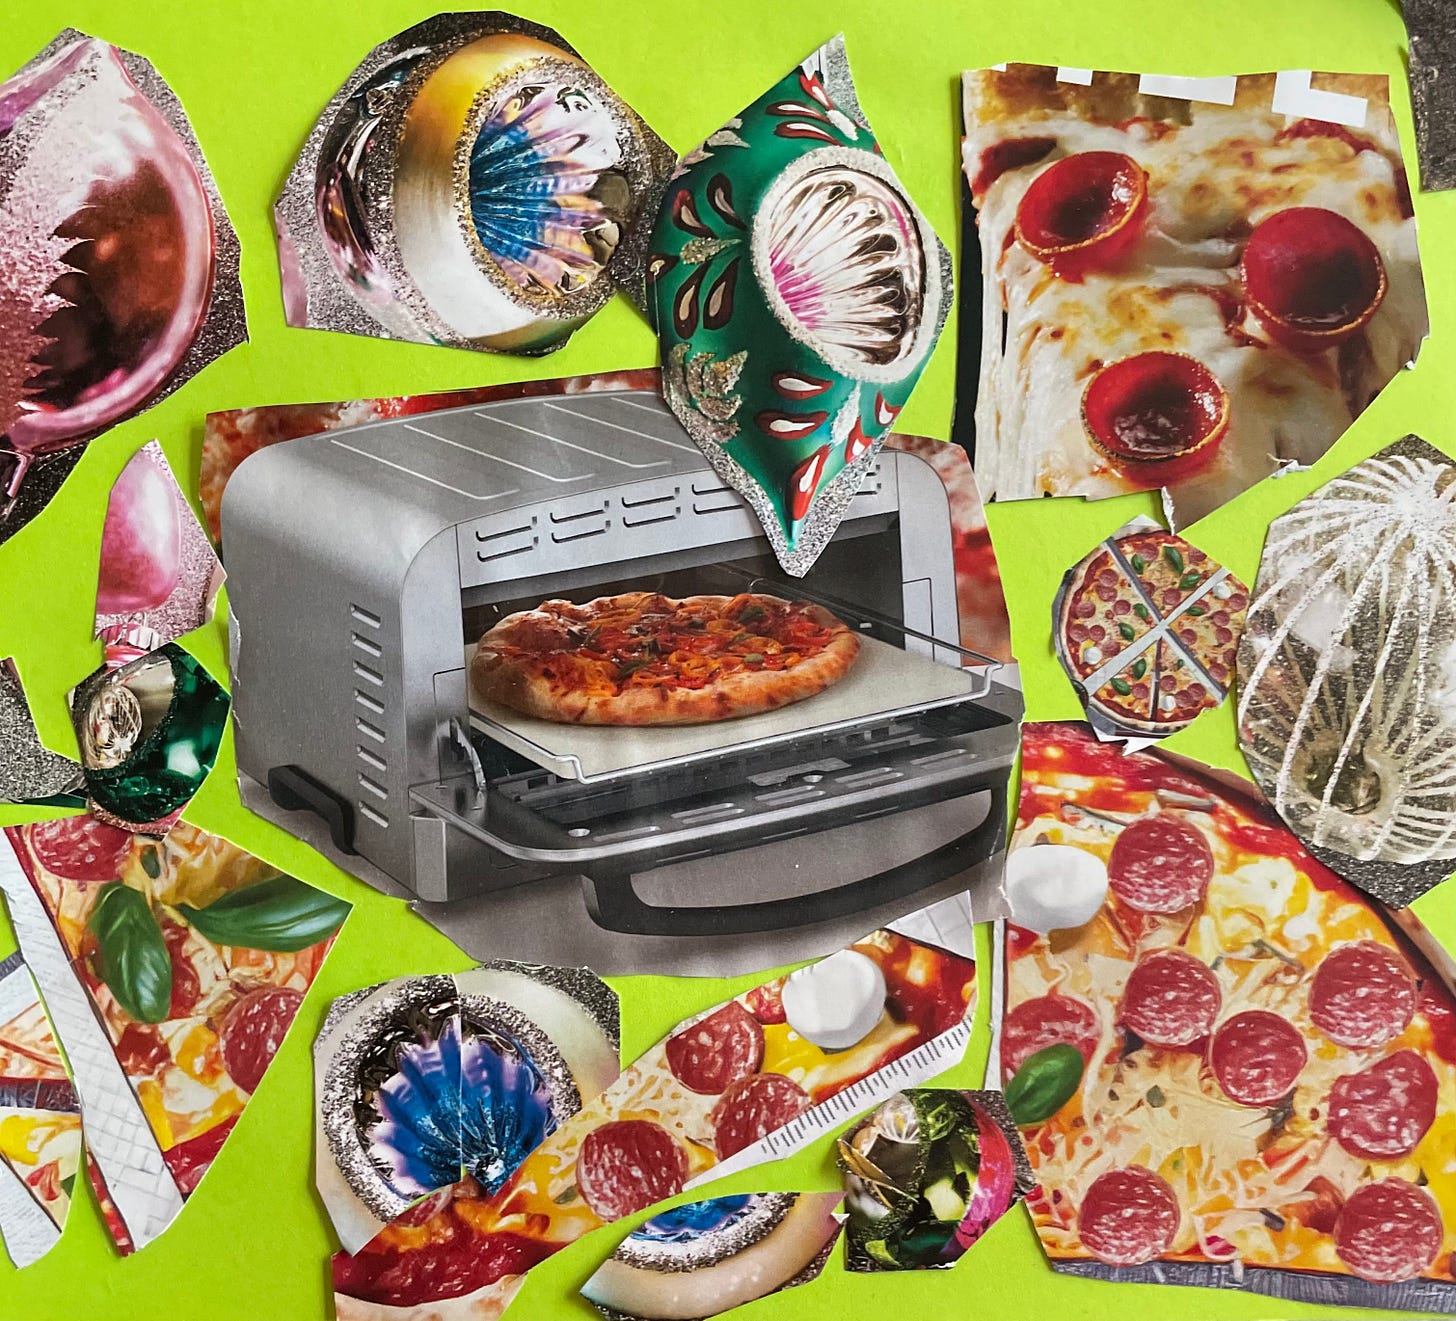 Cut out magazine photos of shiny ornaments and pizza pieces are glued on a bright green background.